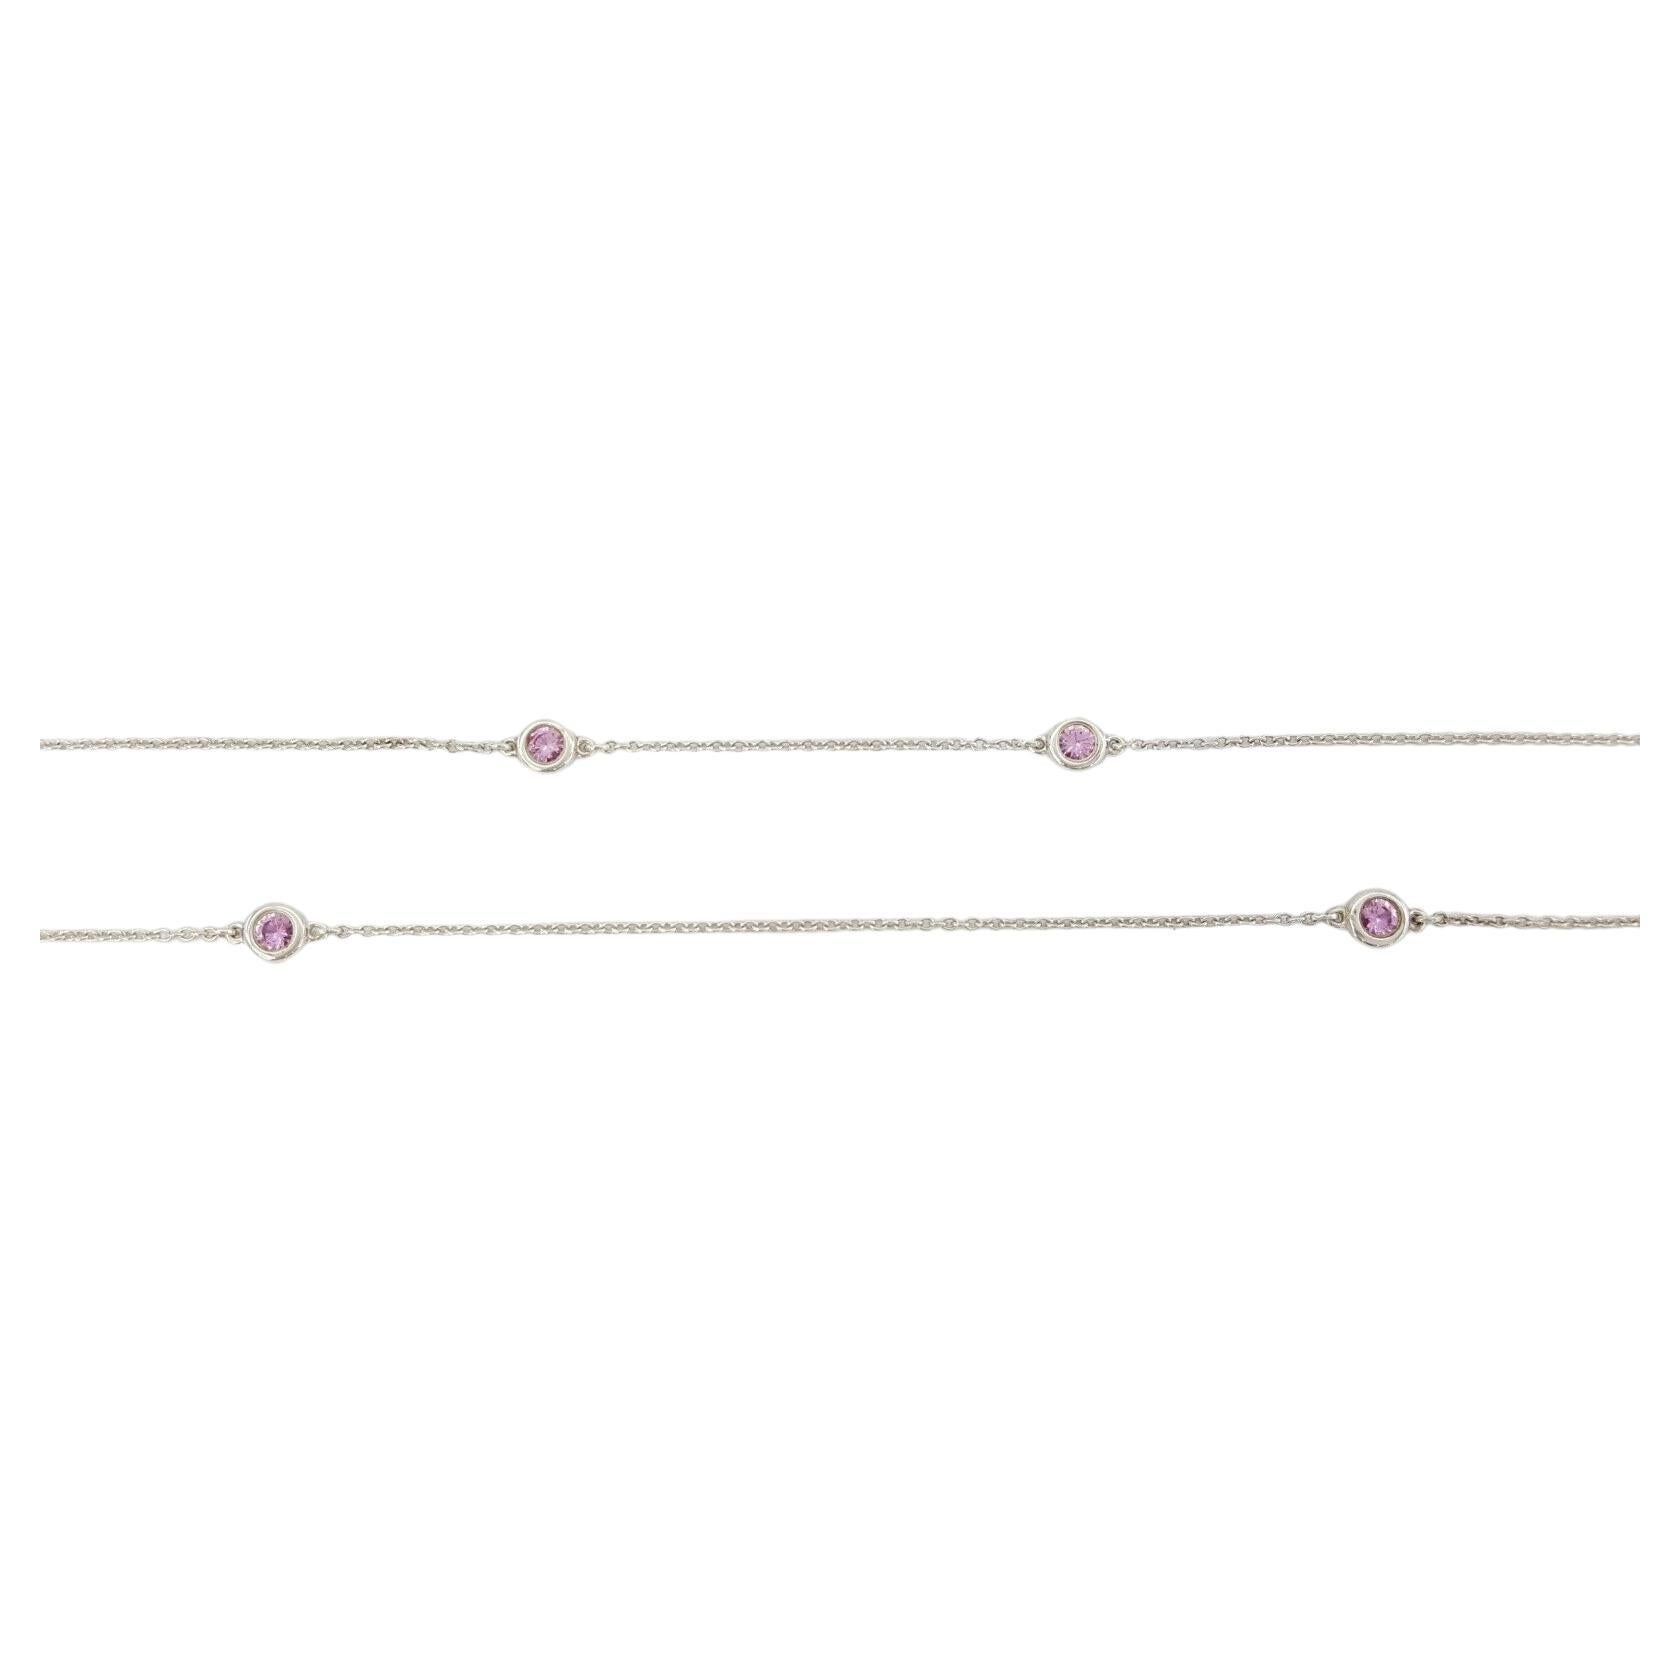 This is a 36-inch Tiffany & Co. Elsa Peretti® Color by the Yard® Sparkle necklace crafted from sterling silver, featuring a total weight of 1.3 carats of round brilliant-cut pink sapphires. The necklace, weighing 5.5 grams, comes with a 36-inch